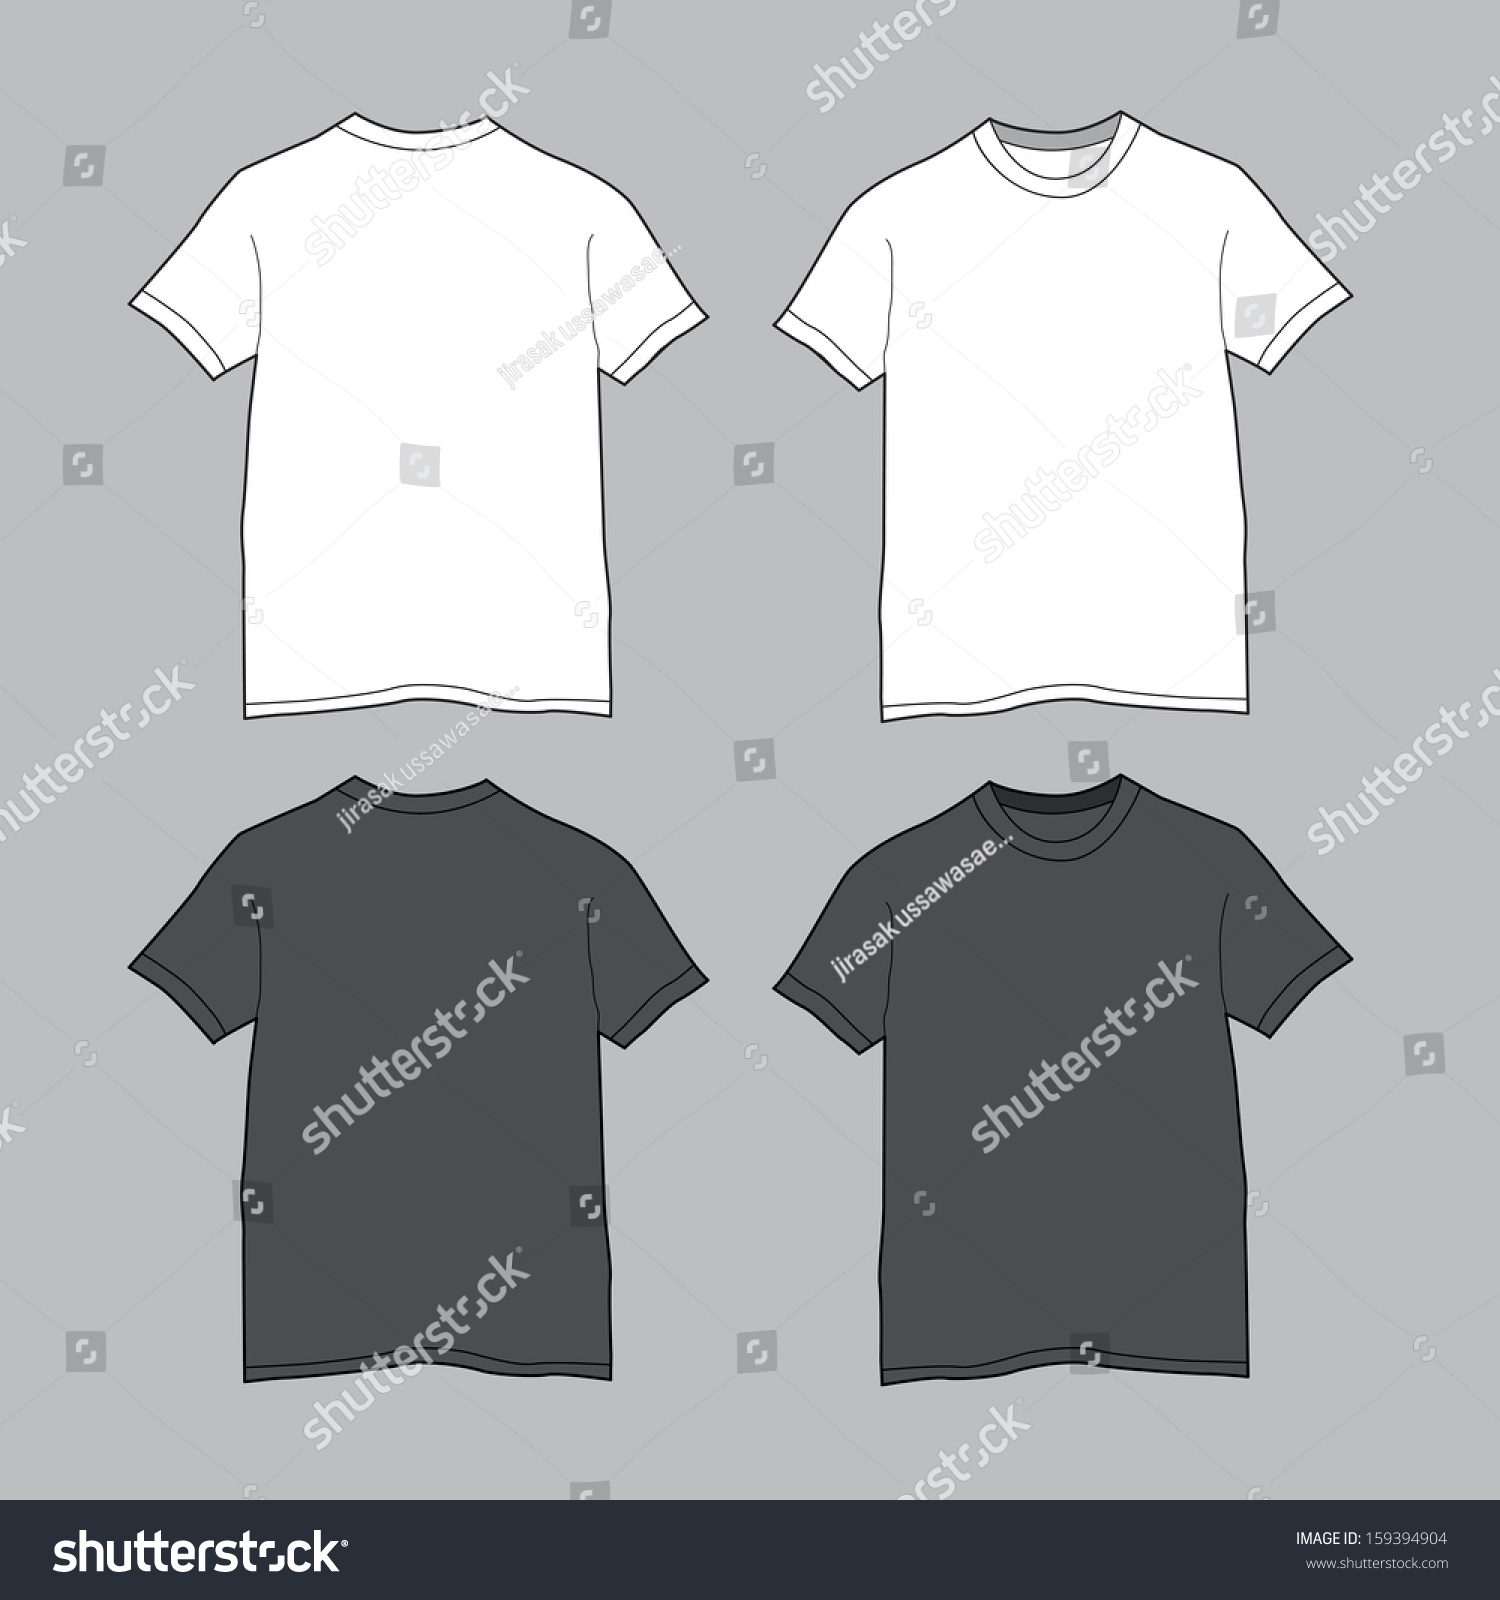 Front And Back Views Of Blank T-Shirt Stock Vector Illustration ...